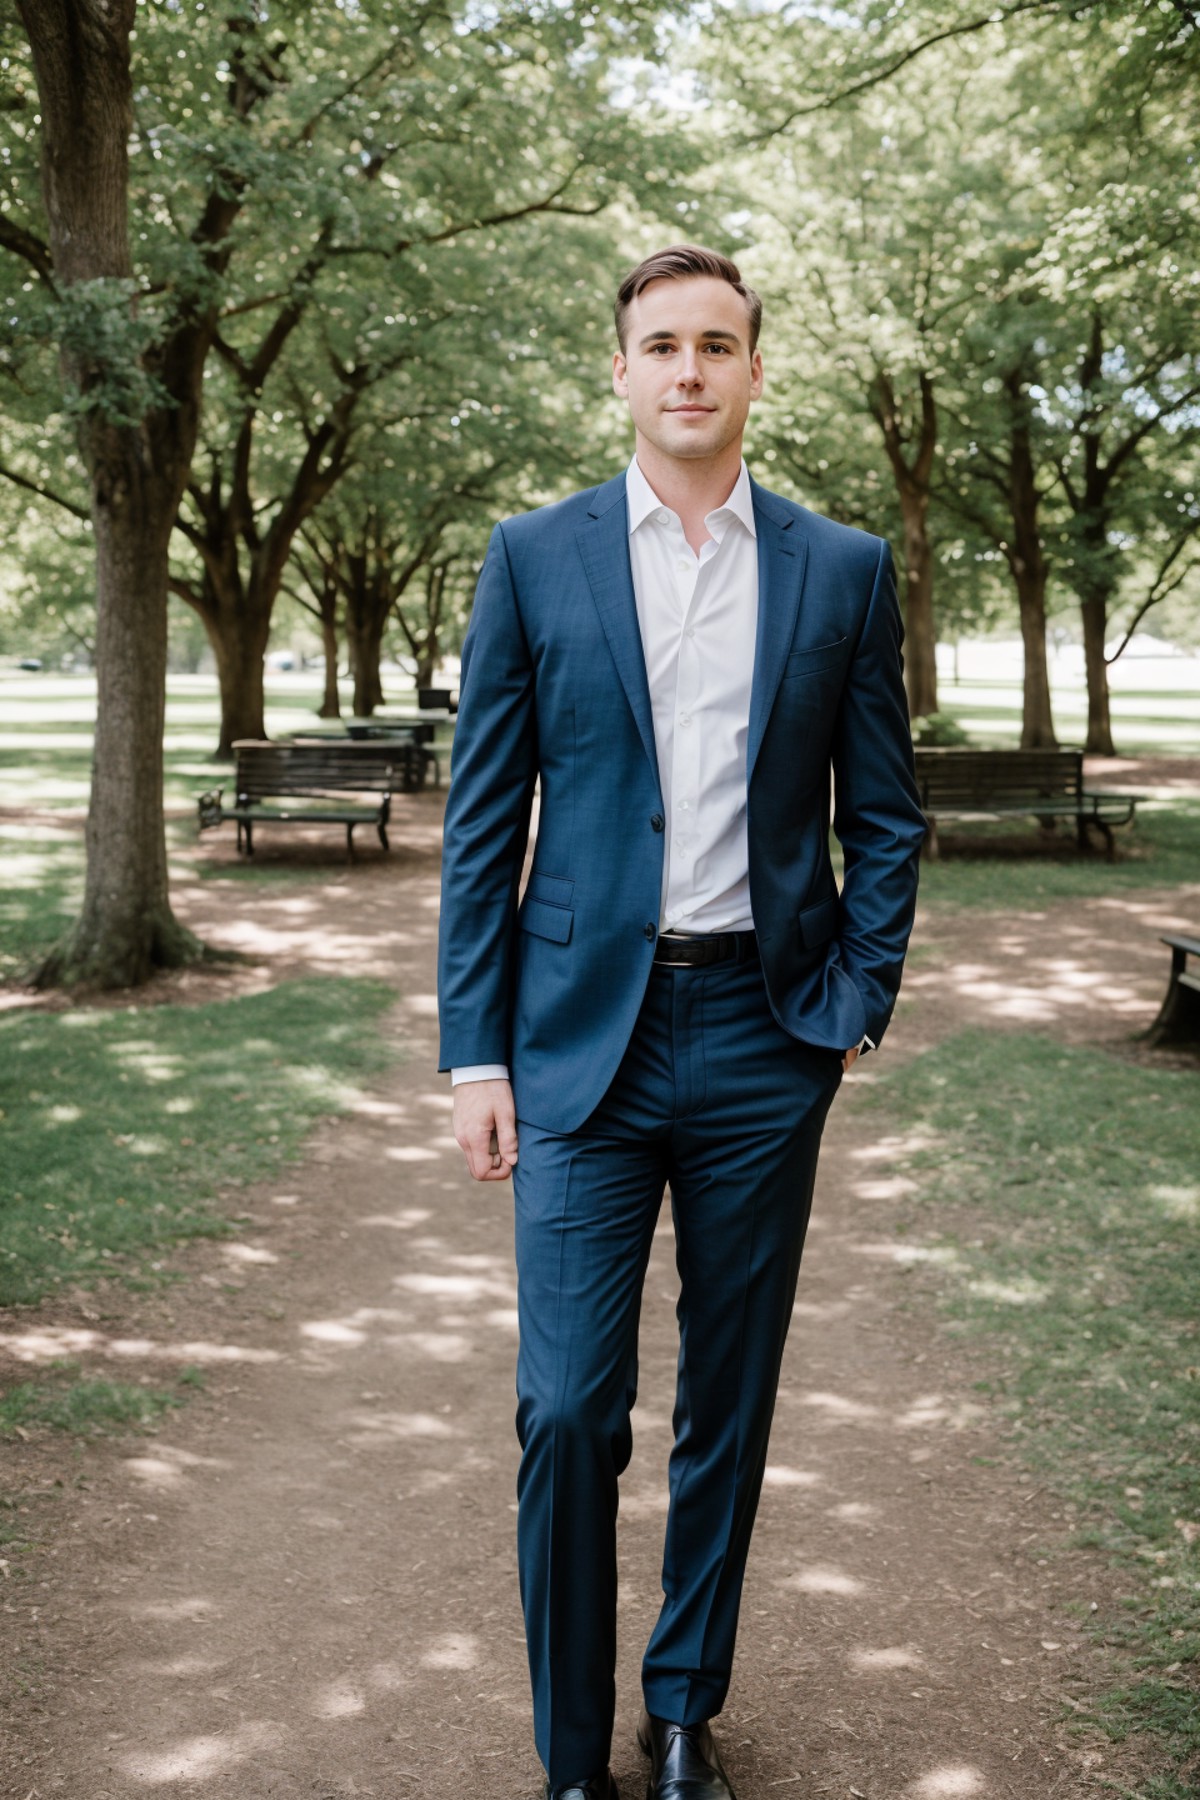 half body RAW photo of a man in a suit in a park